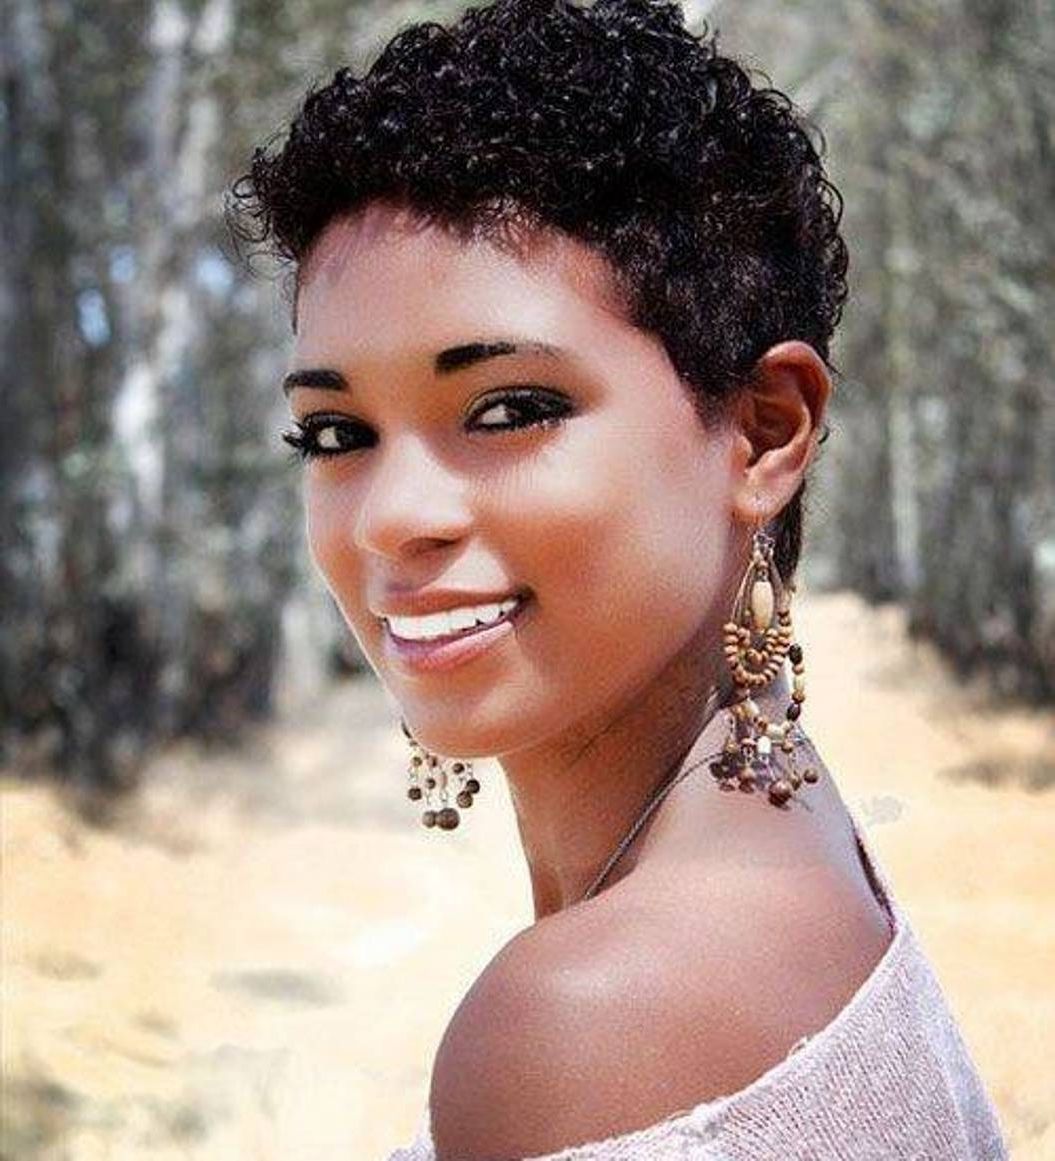 Emejing Short Hairstyles For Natural Hair African American Gallery With Regard To Most Recent Pixie Hairstyles For Natural Hair (View 3 of 15)